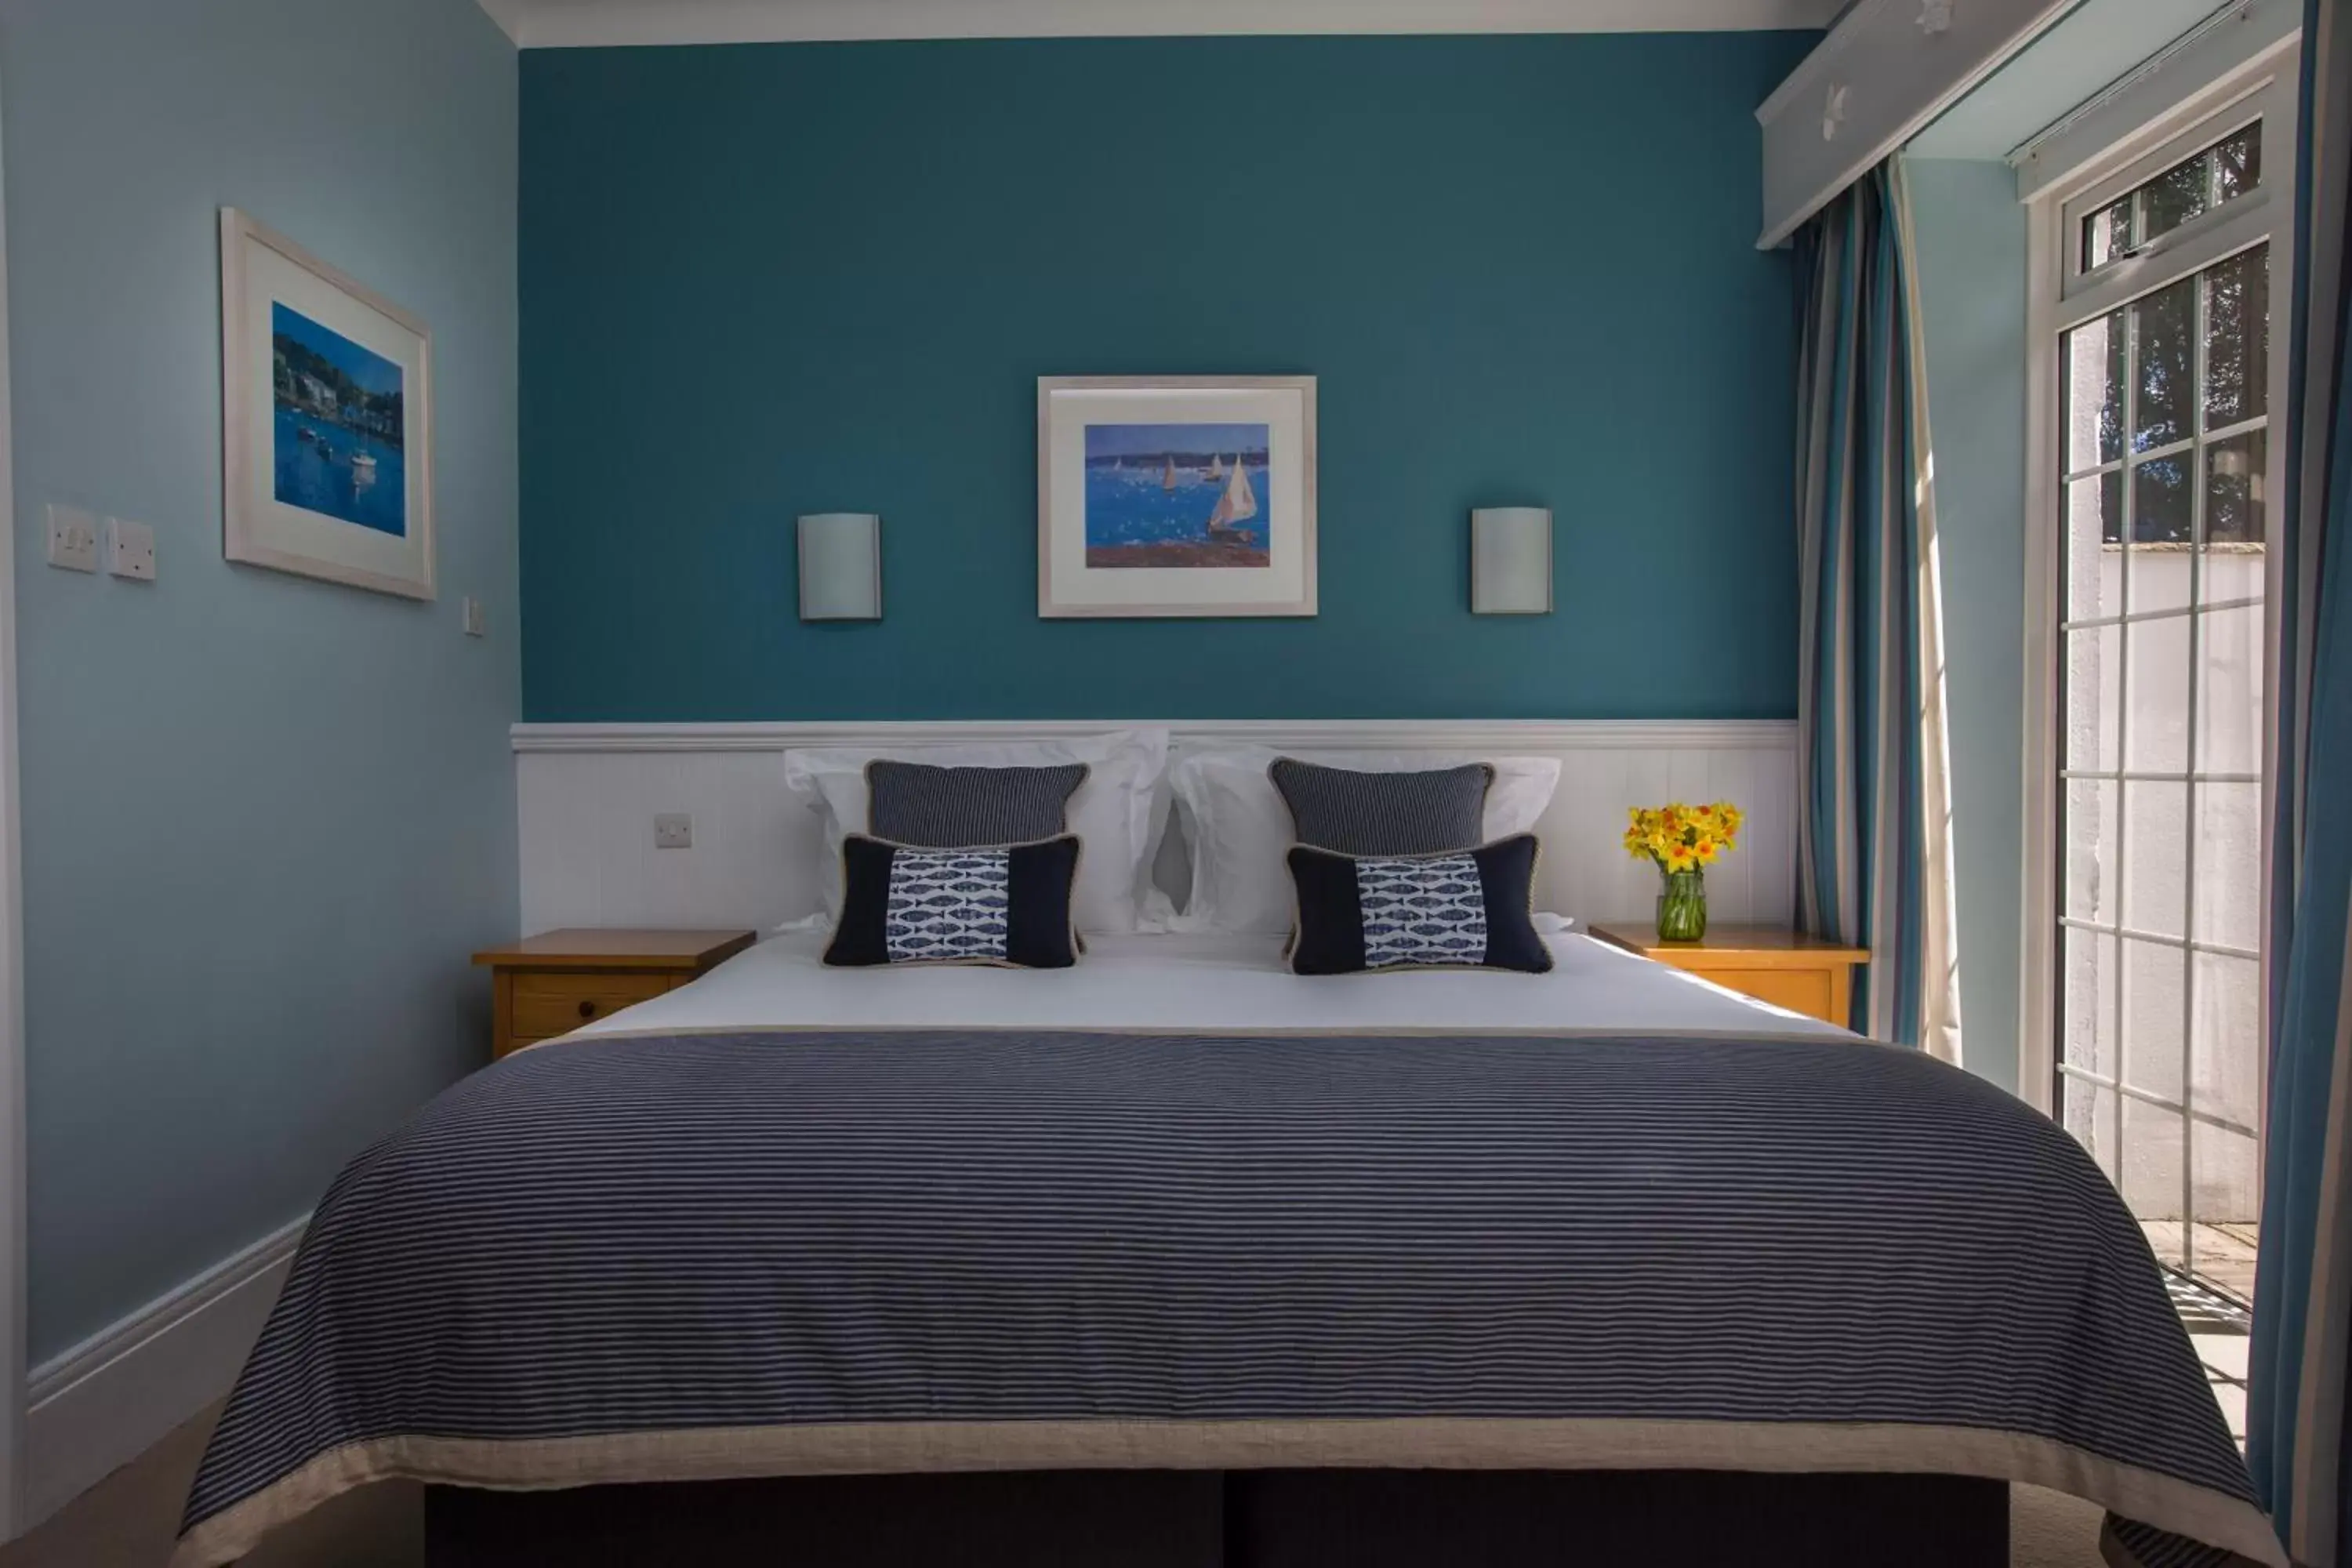 Bed in St Michaels Resort, Falmouth